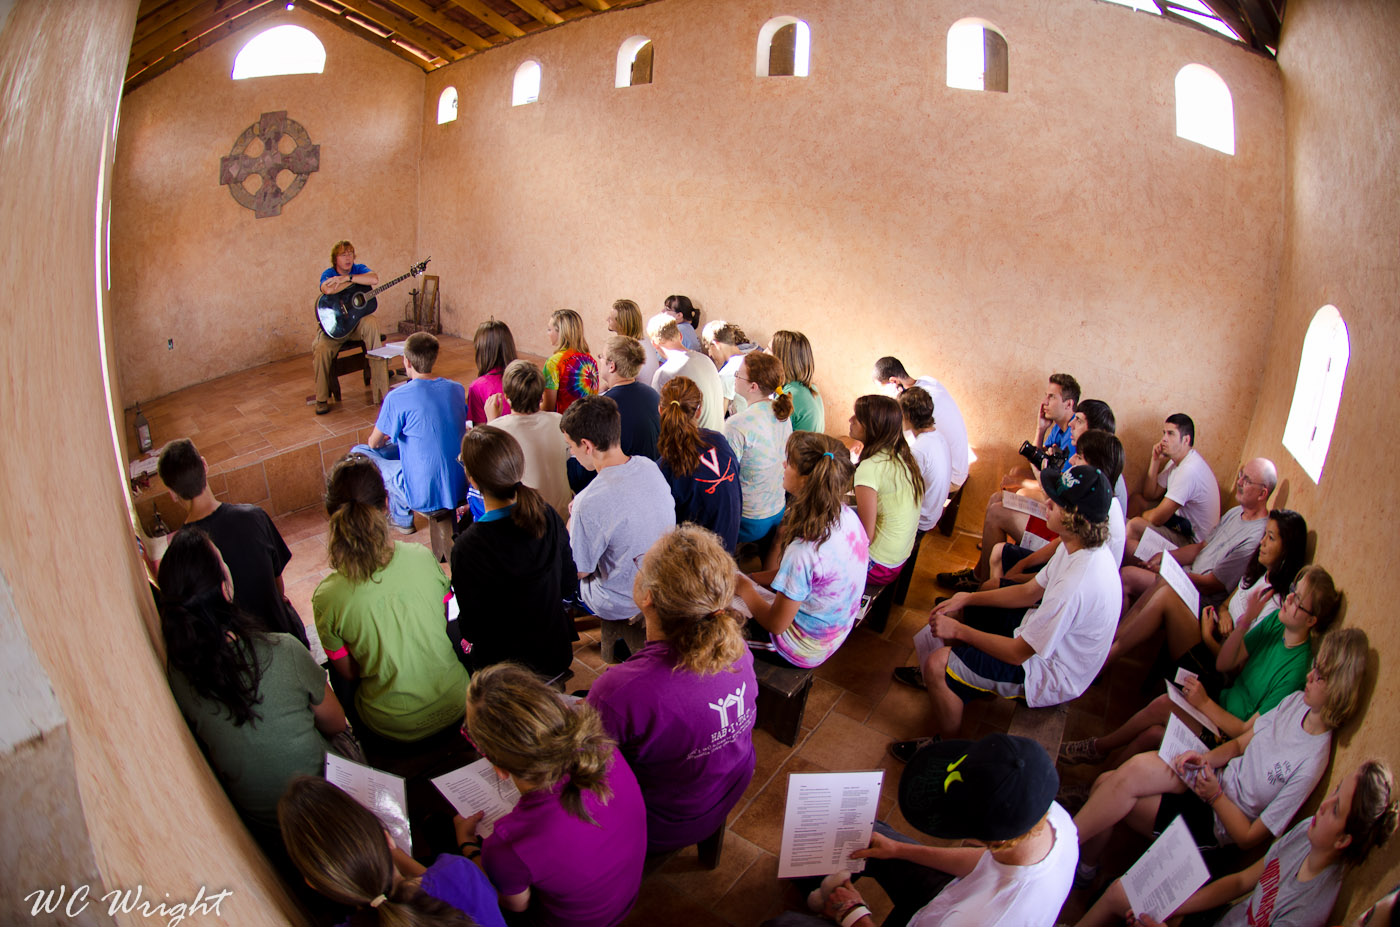 Morning prayer in the lower chapel at Cuirim House in Nogales